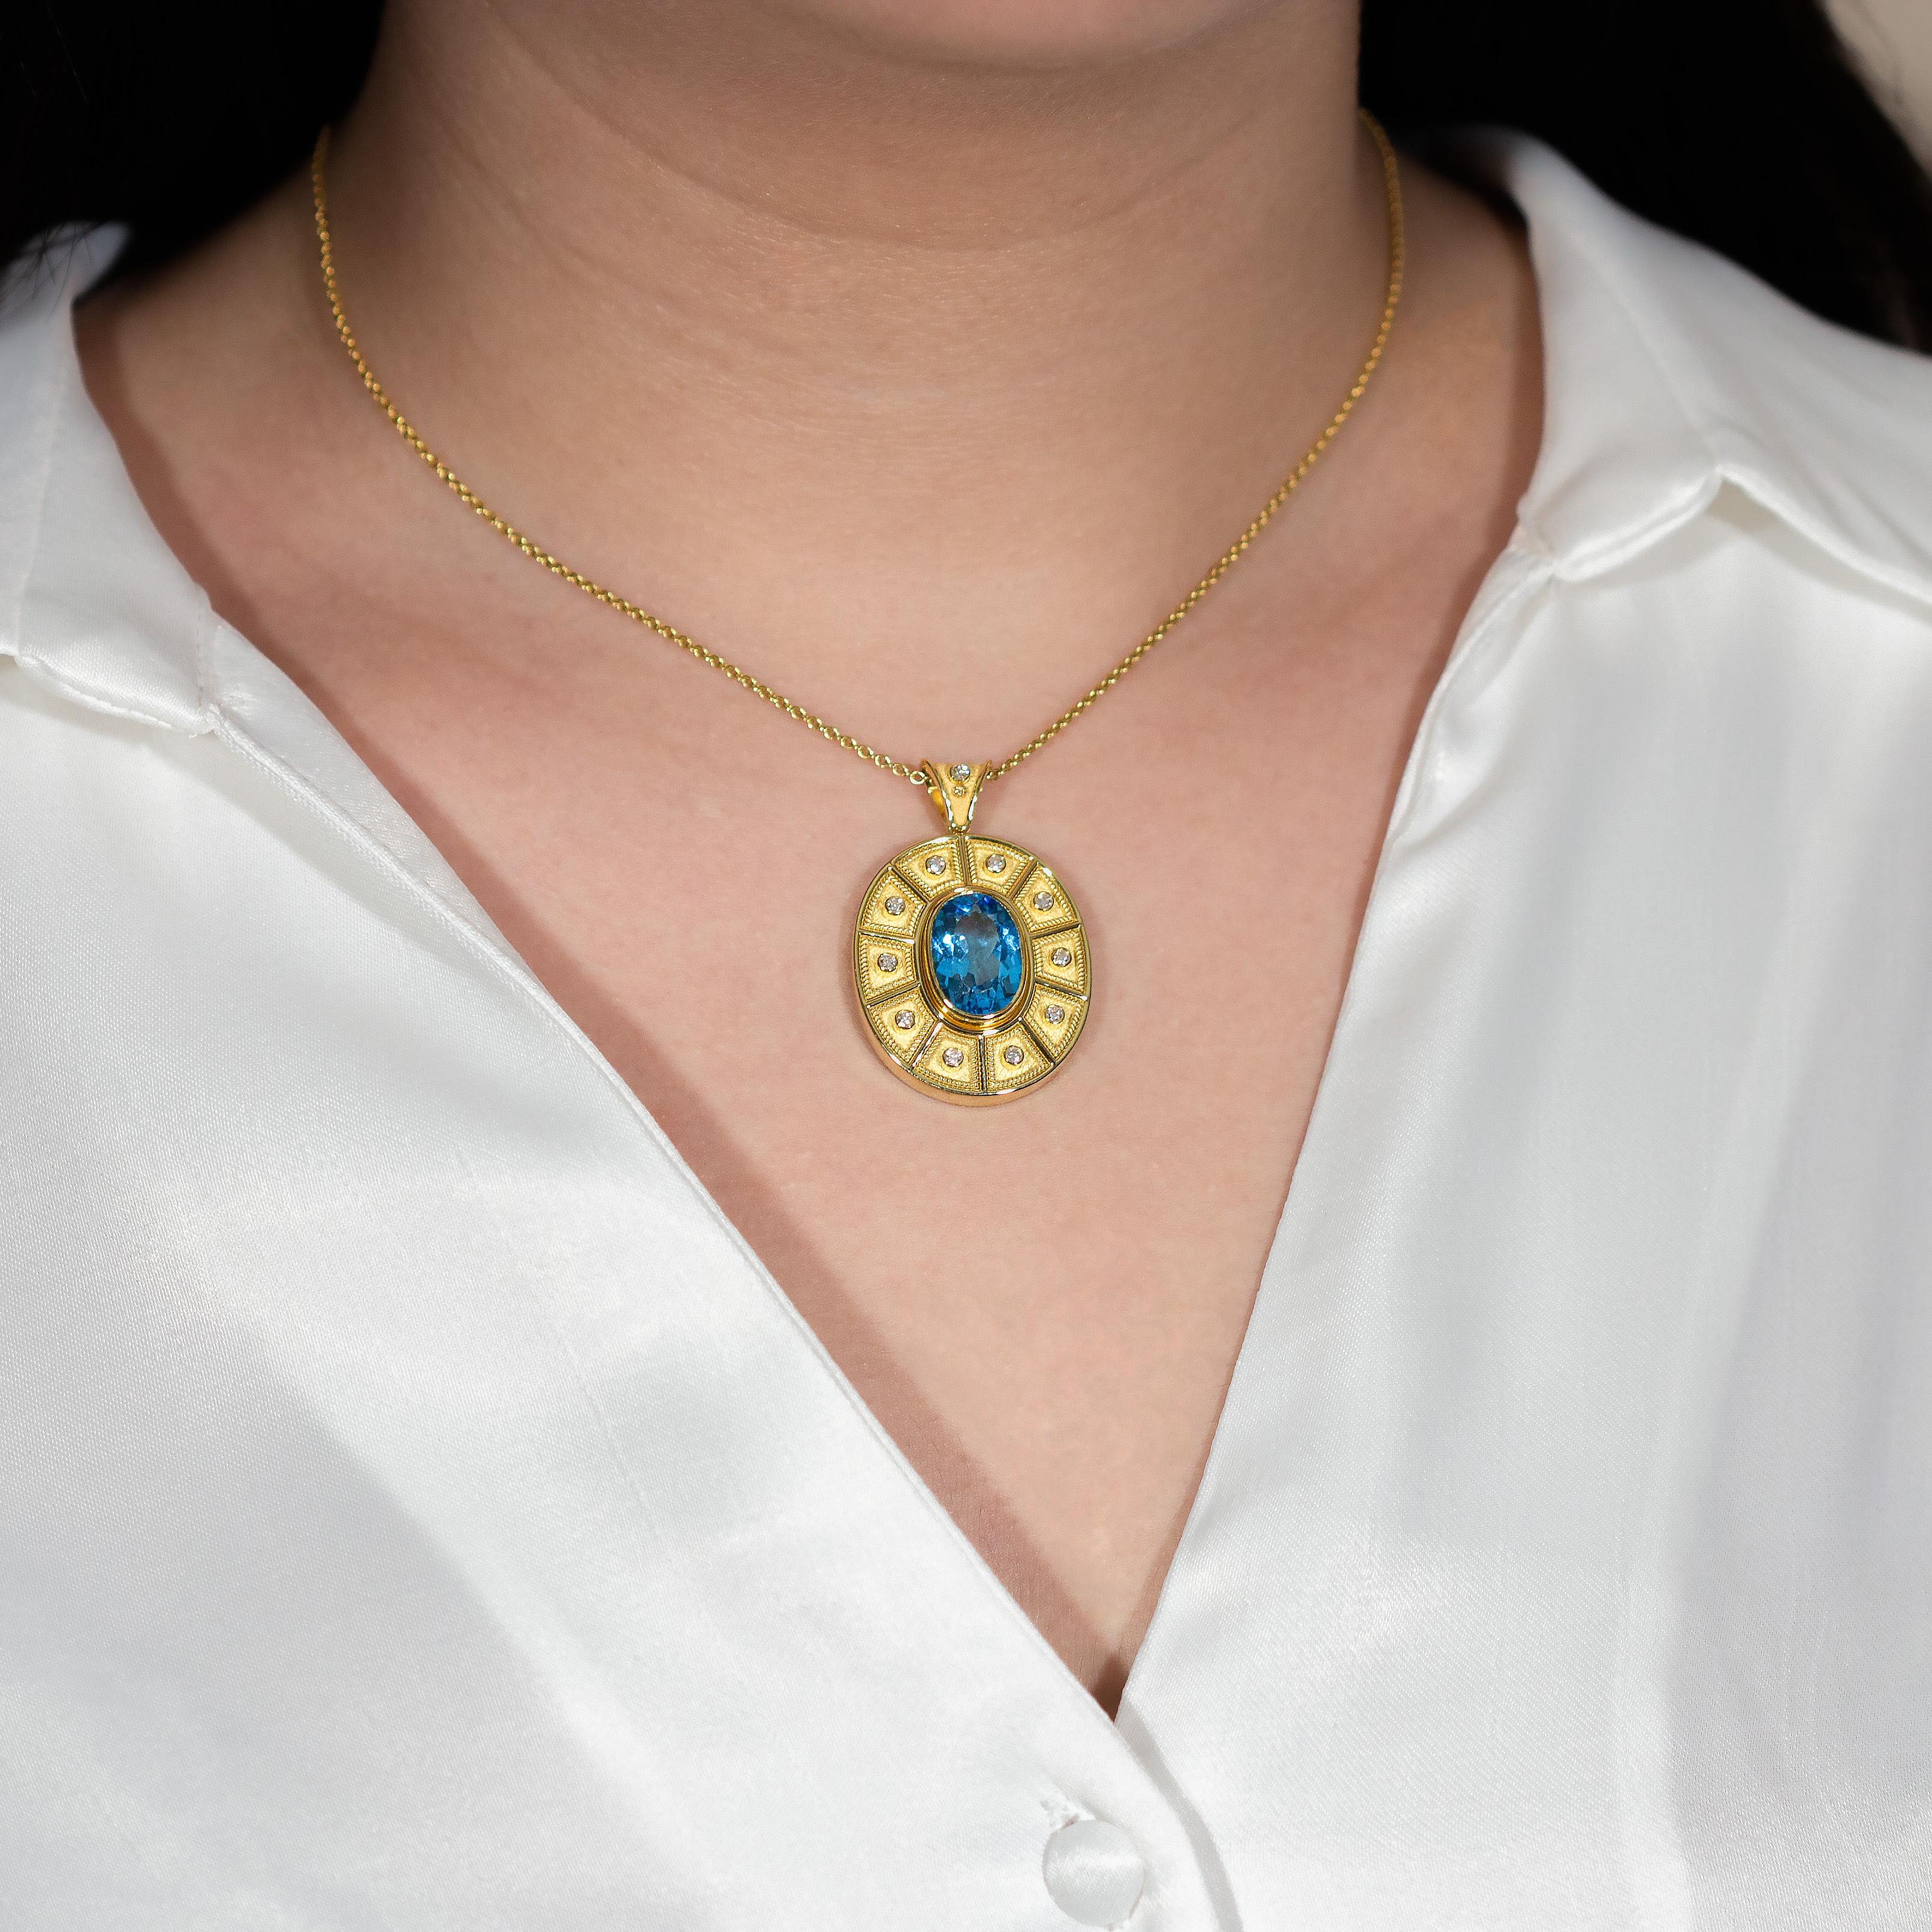 Adorn yourself with our grand oval gold pendant, intricately adorned with a stunning motif of trapezoids, each embraced by brilliant gemstones, culminating in a magnificent centerpiece, a resplendent Swiss topaz. A true testament to opulence and